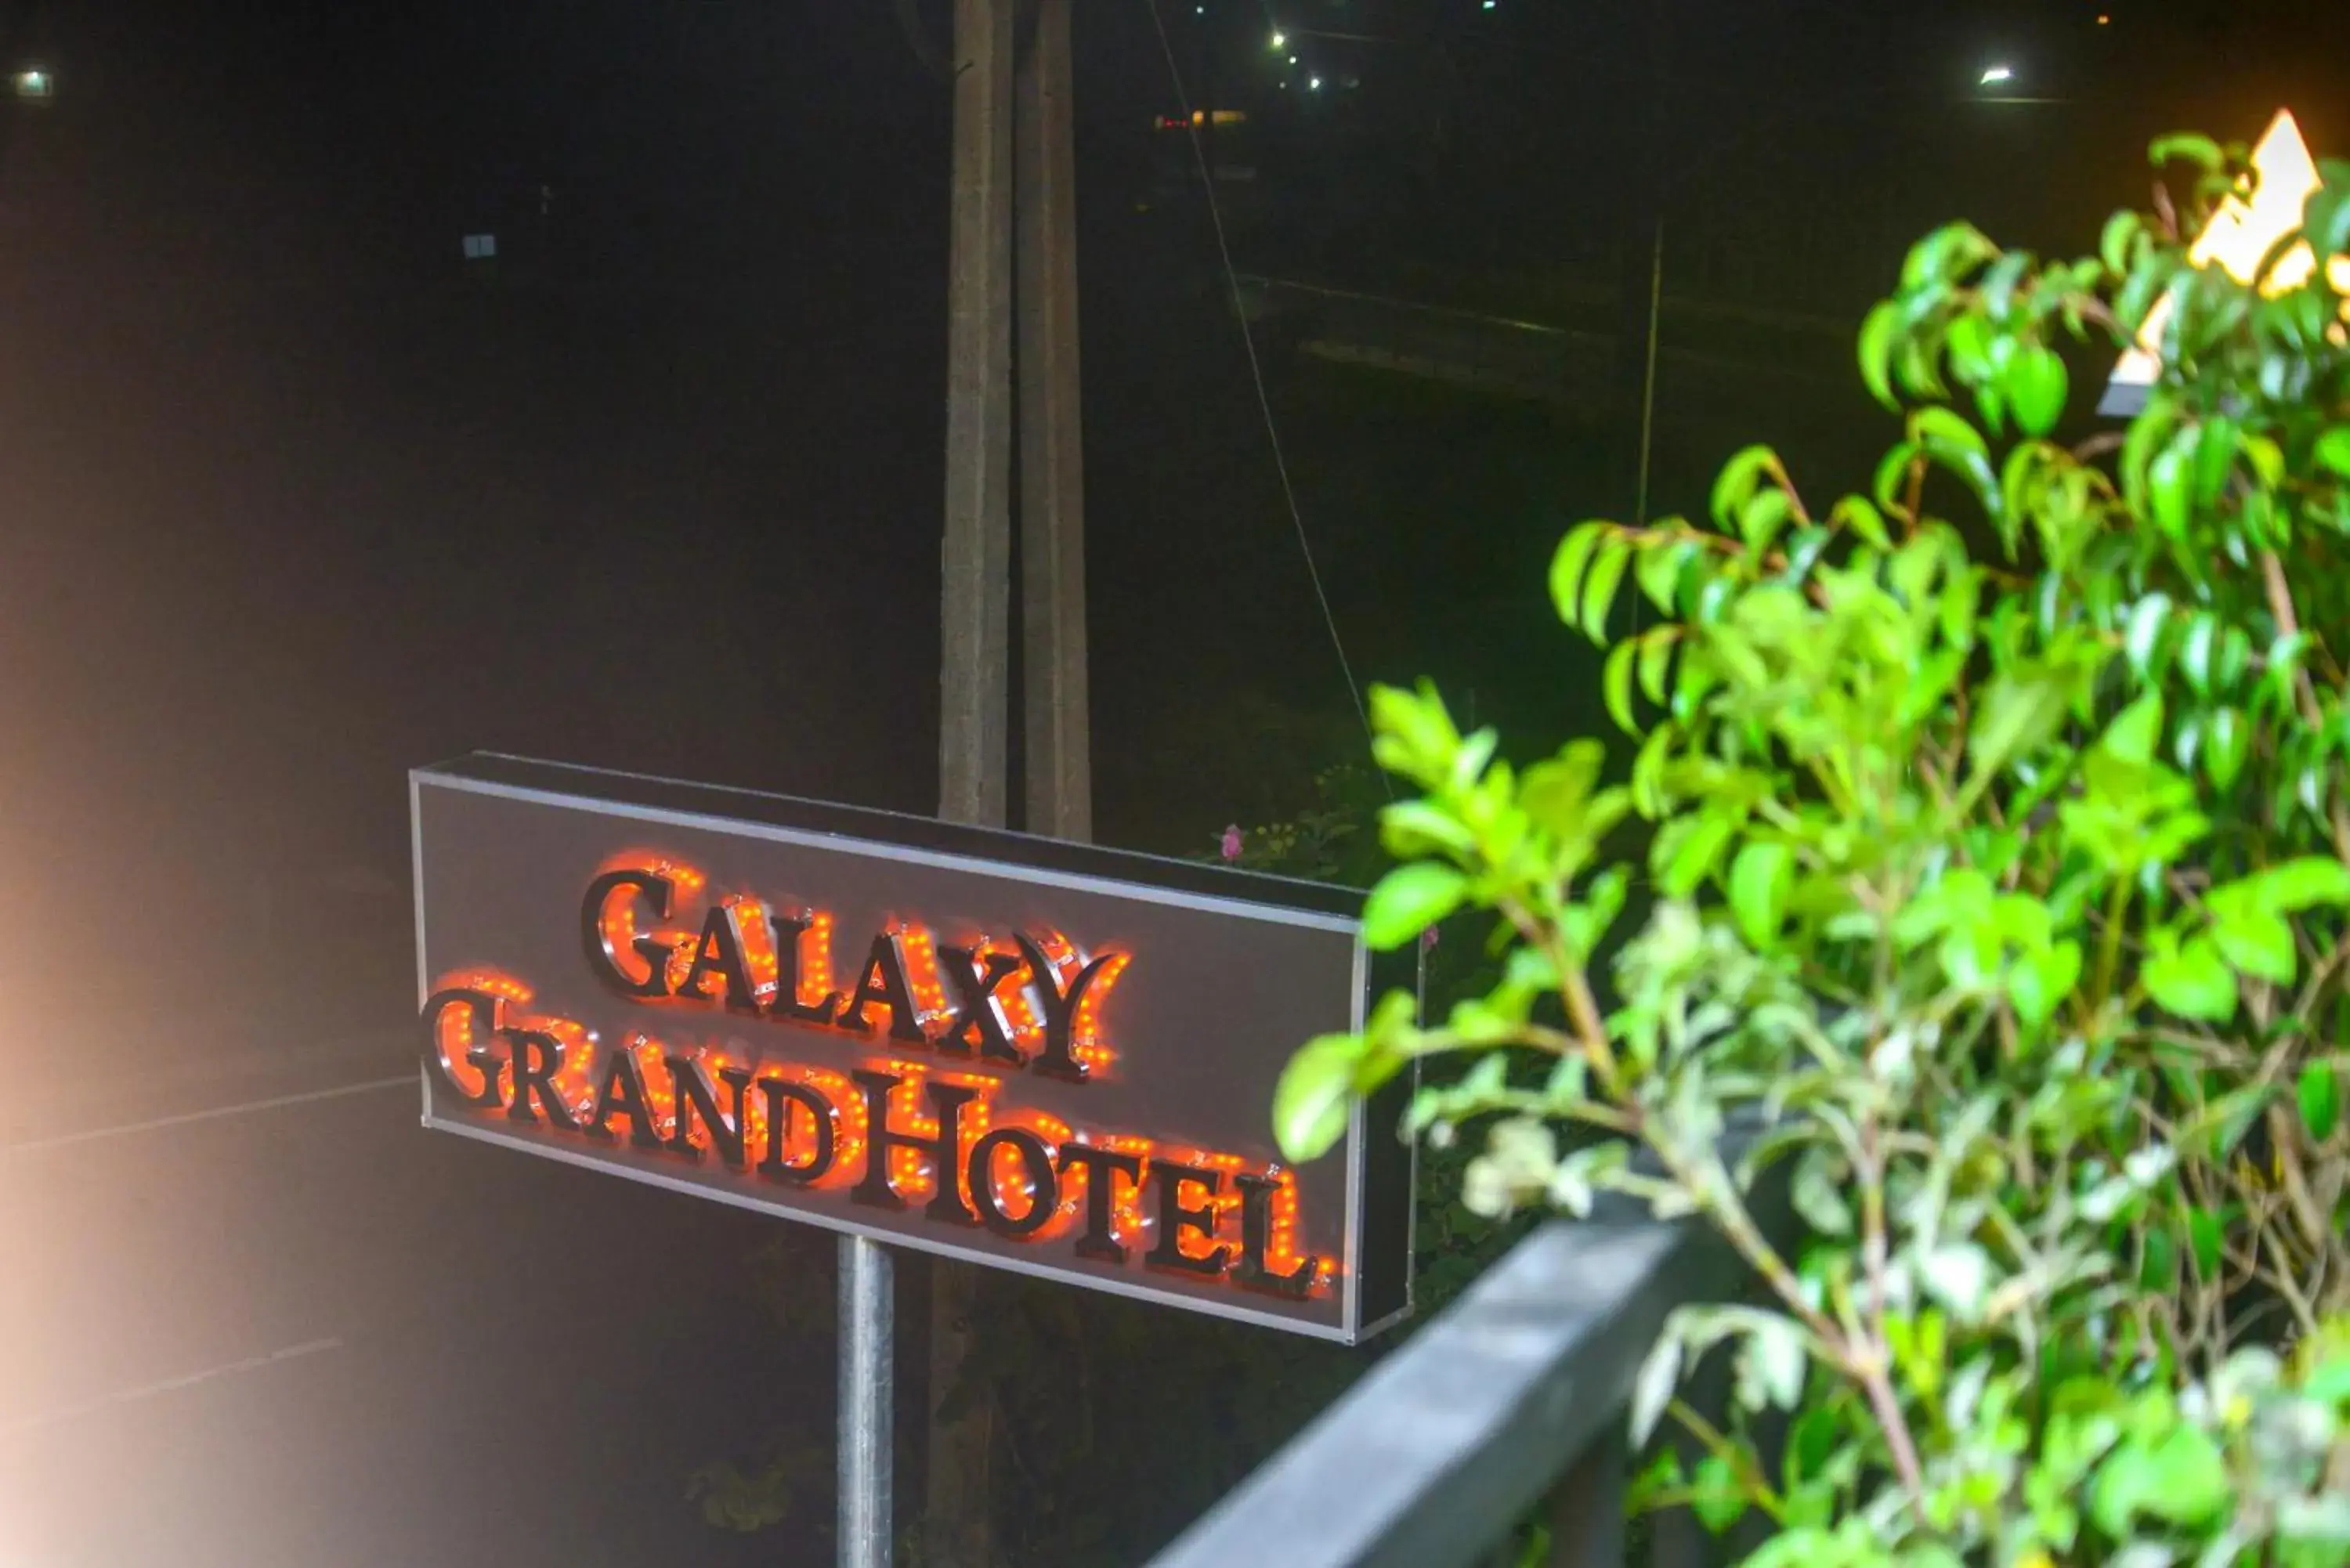 Property logo or sign in Galaxy Grand Hotel